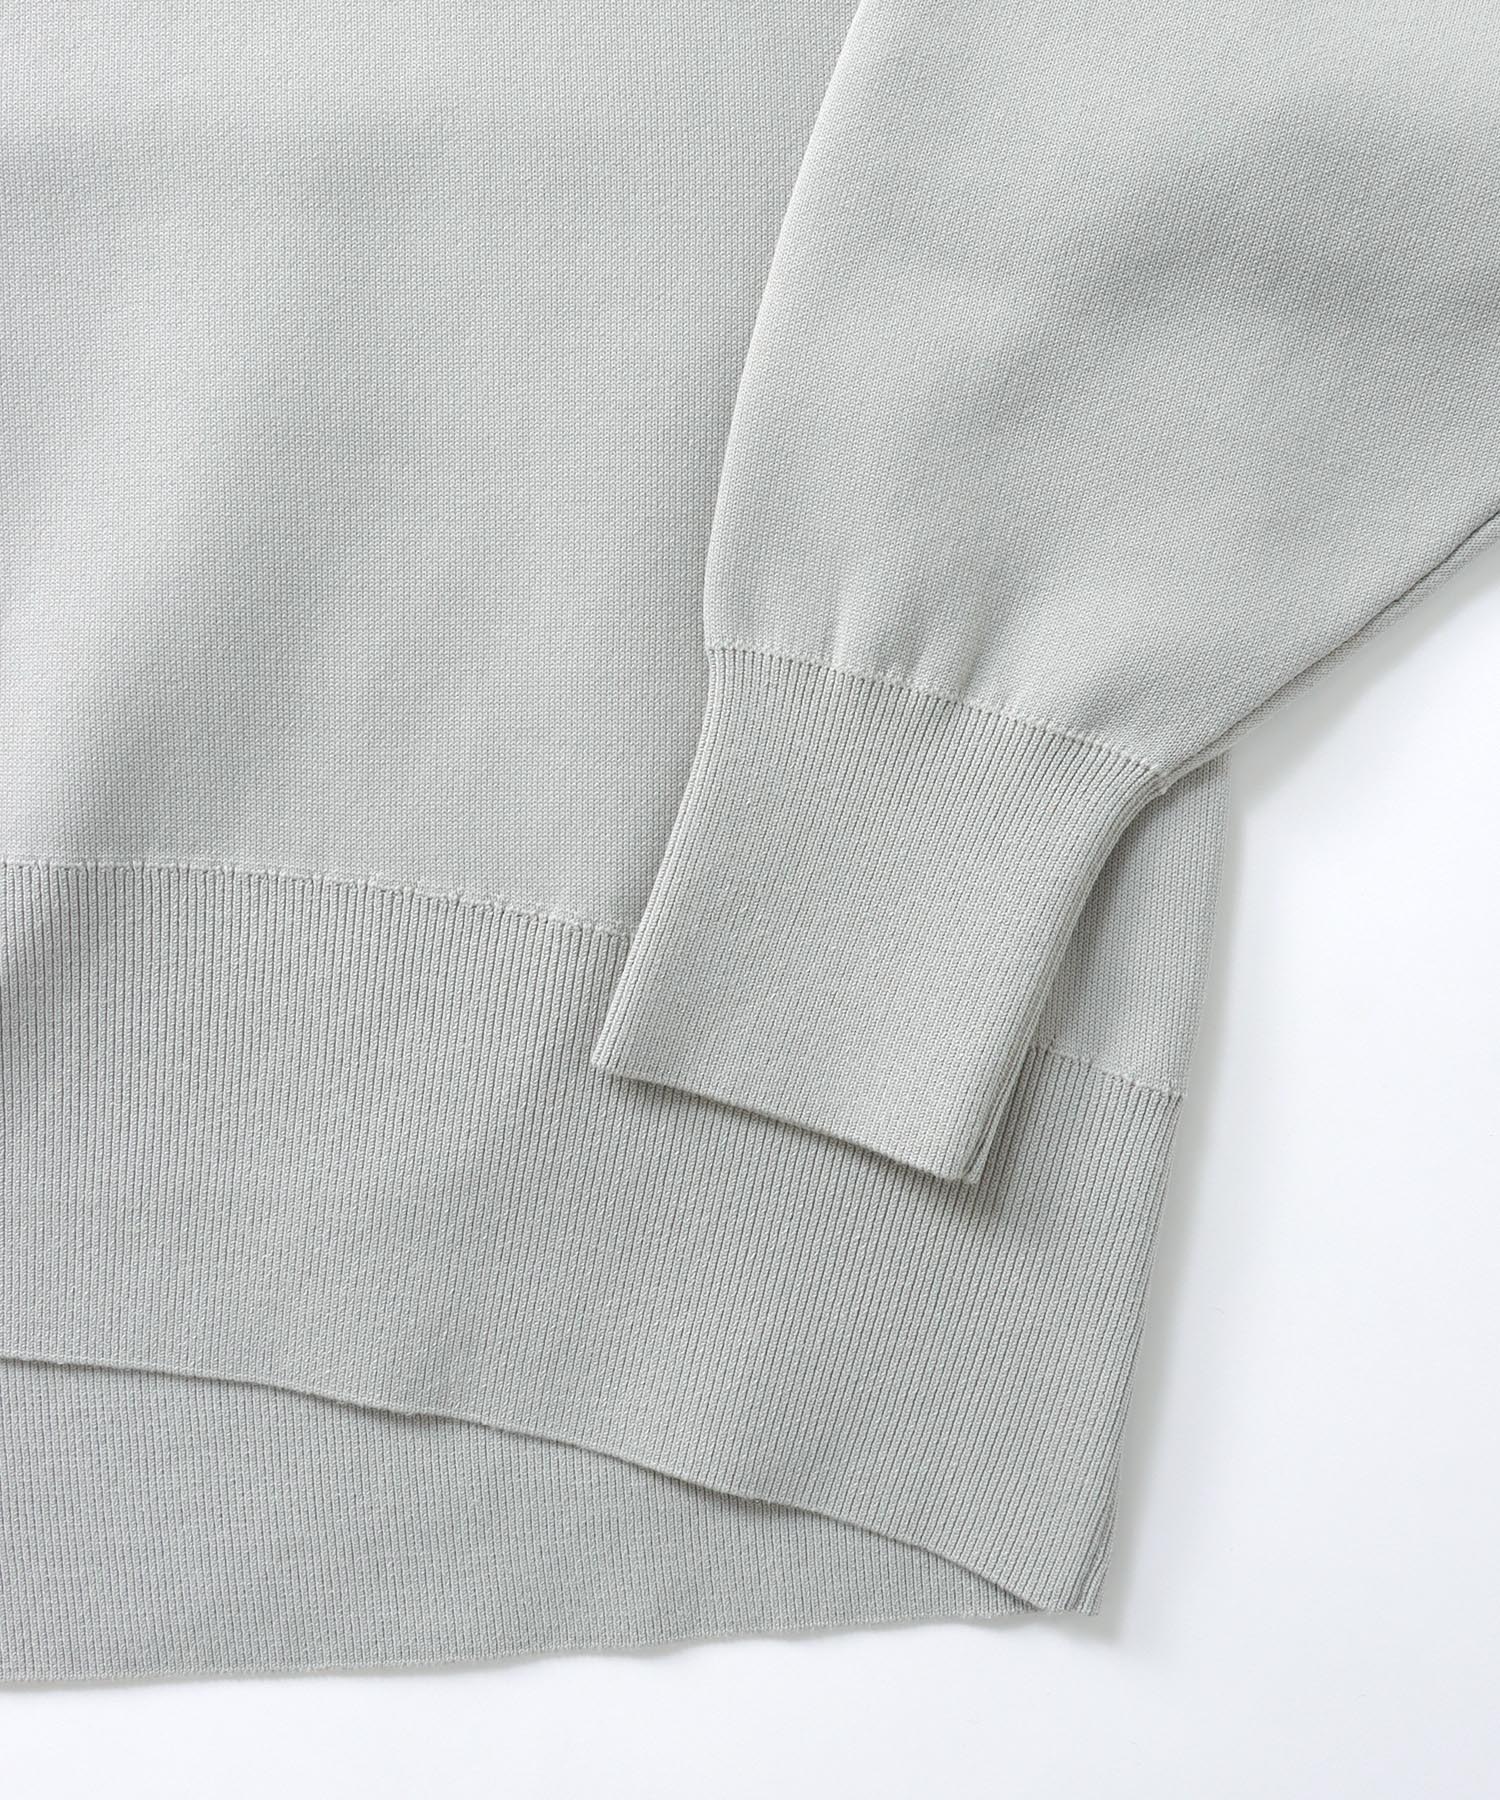 slit sleeve design pull | AND ON JIONE STORE（アンドオン）ジオン ...